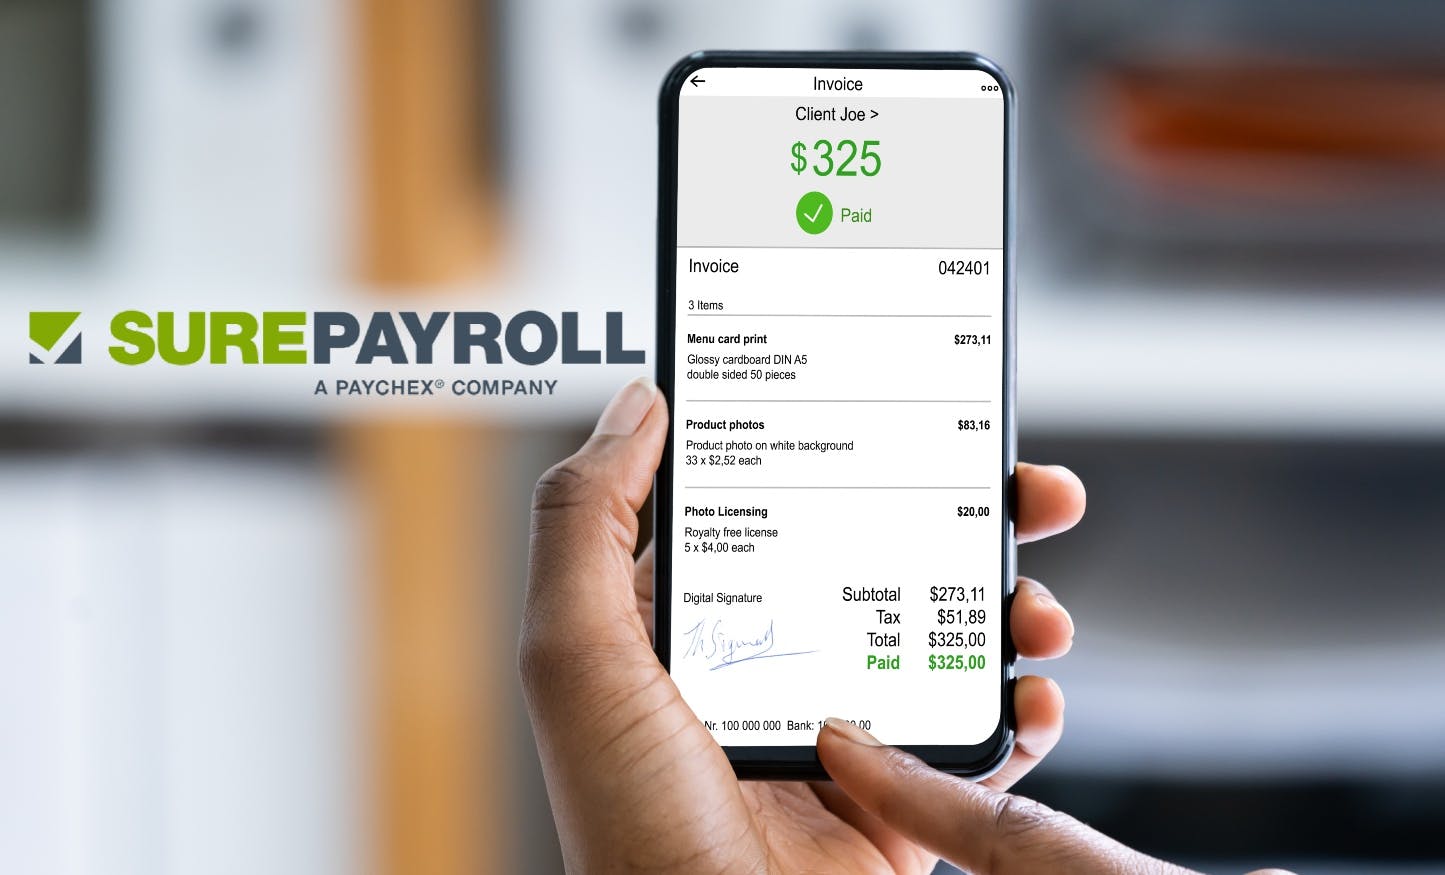 SurePayroll: Review, Features, and Prices